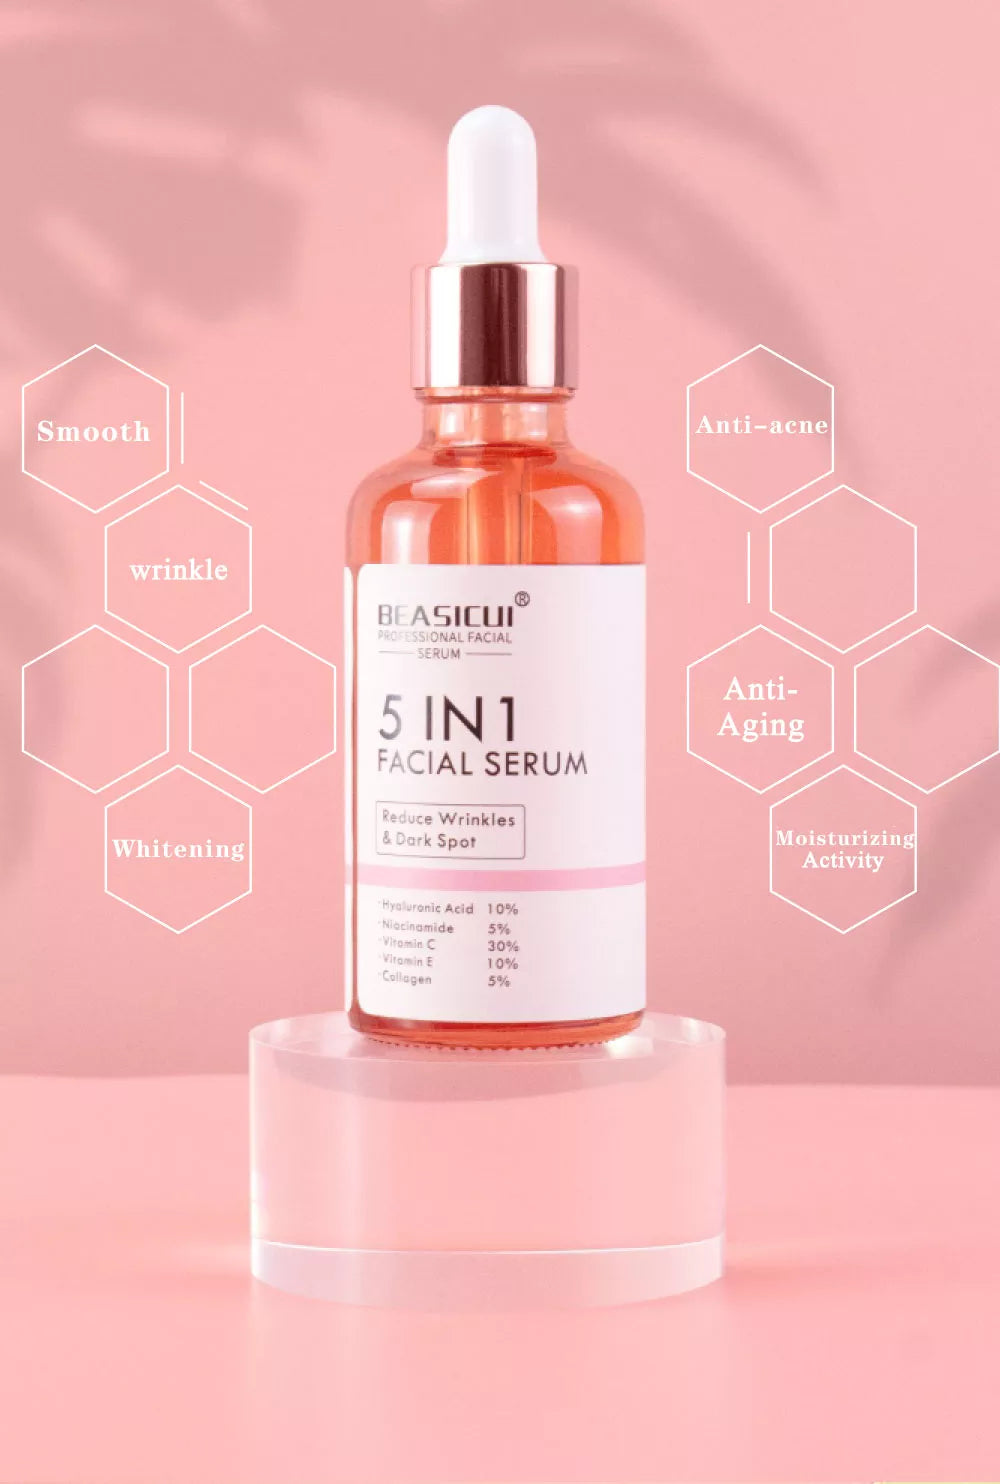 5 in 1 Anti Wrinkle Anti Aging Face Serum with 30% Vitamin C 5% Niacinamide 10% Hyaluronic Acid 10% Vit E 5% Collagen